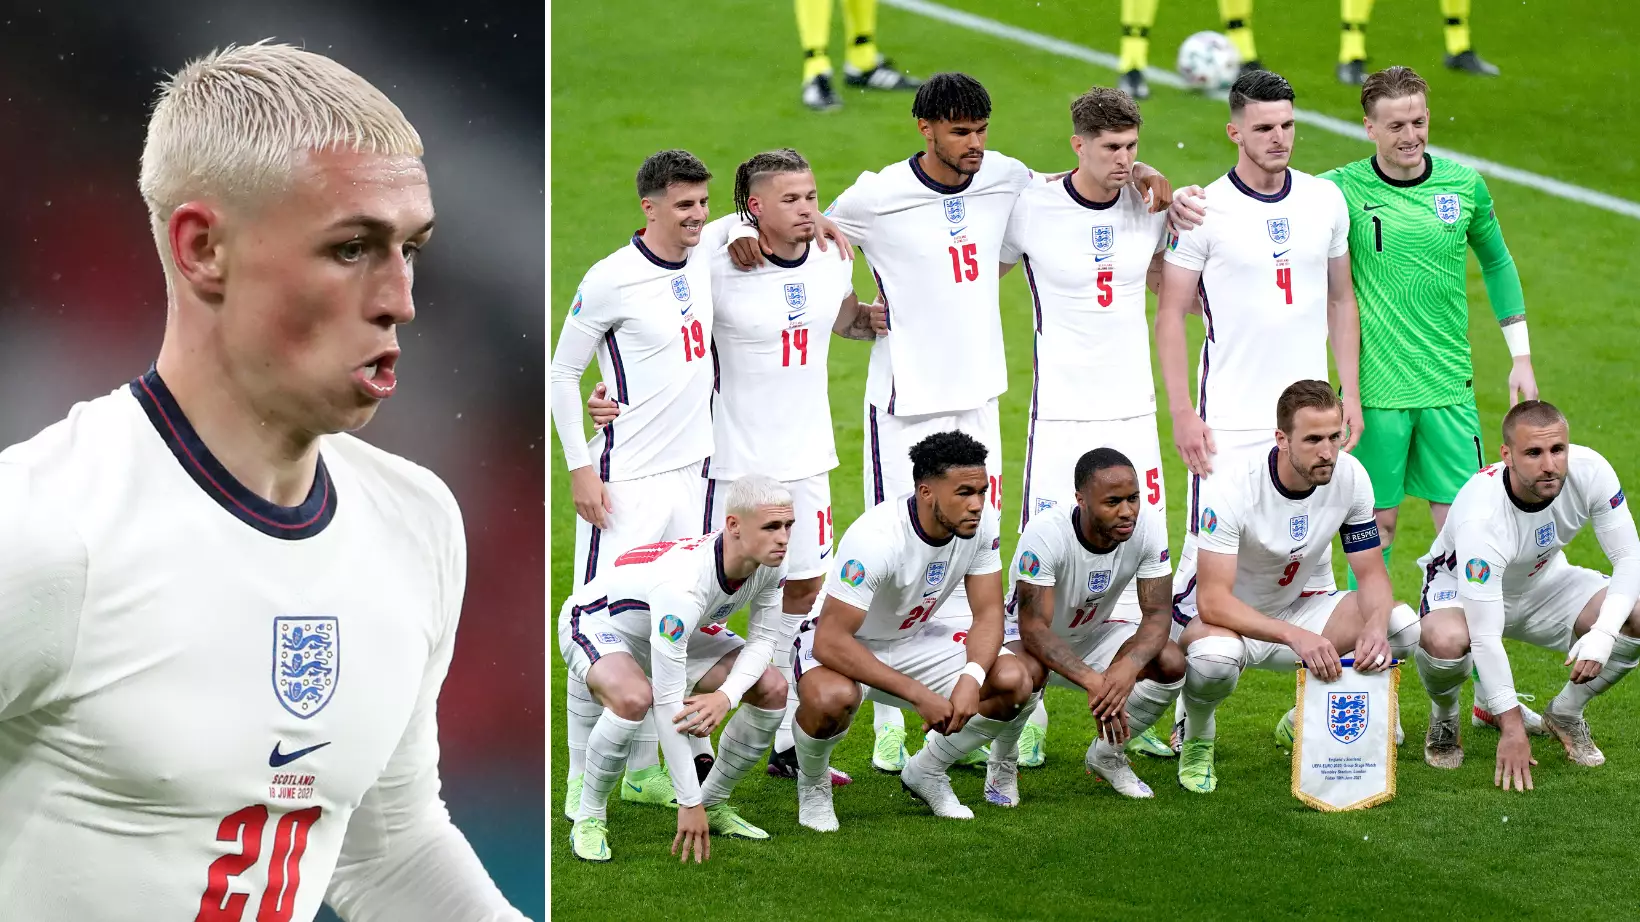 Entire England Team To Dye Hair Blond Like Phil Foden If They Win Euro 2020